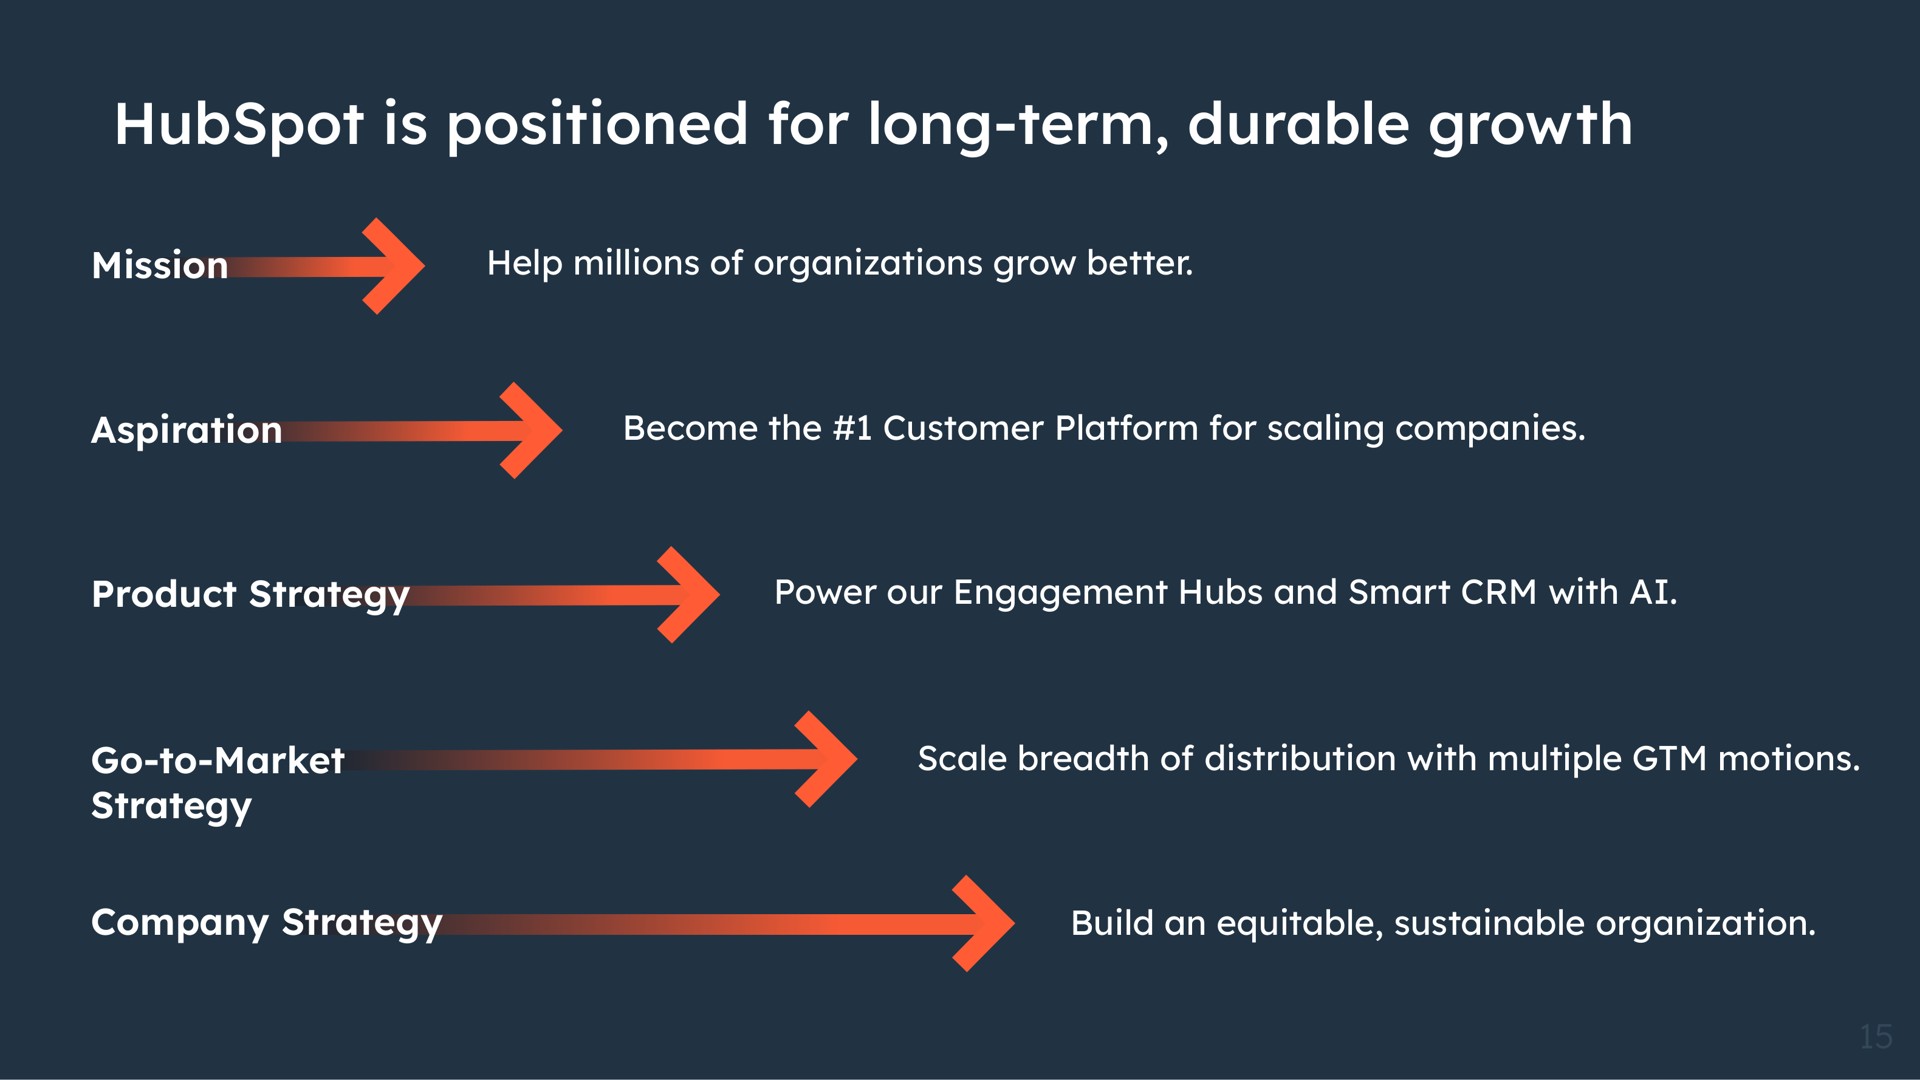 is positioned for long term durable growth mission help millions of organizations grow better aspiration become the customer platform scaling companies product strategy power our engagement hubs and smart with go to market strategy scale breadth of distribution with multiple motions company strategy build an equitable sustainable organization | Hubspot